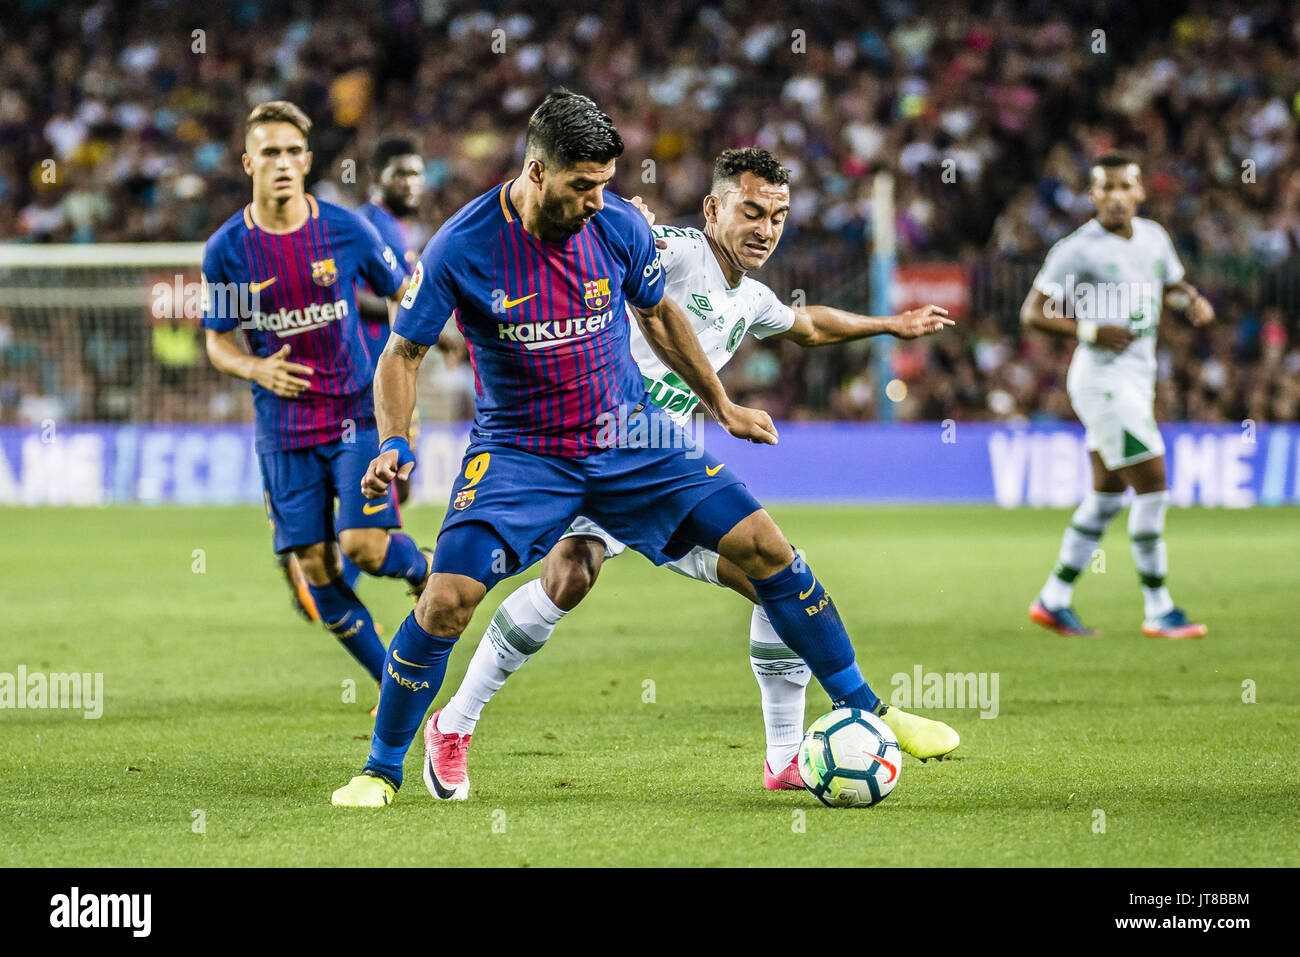 Barcelona, Catalonia, Spain. 7th Aug, 2017. FC Barcelona forward SUAREZ in action during the Joan Gamper Trophy between FC Barcelona and Chapecoense at the Camp Nou stadium in Barcelona Credit: Matthias Oesterle/ZUMA Wire/Alamy Live News Stock Photo